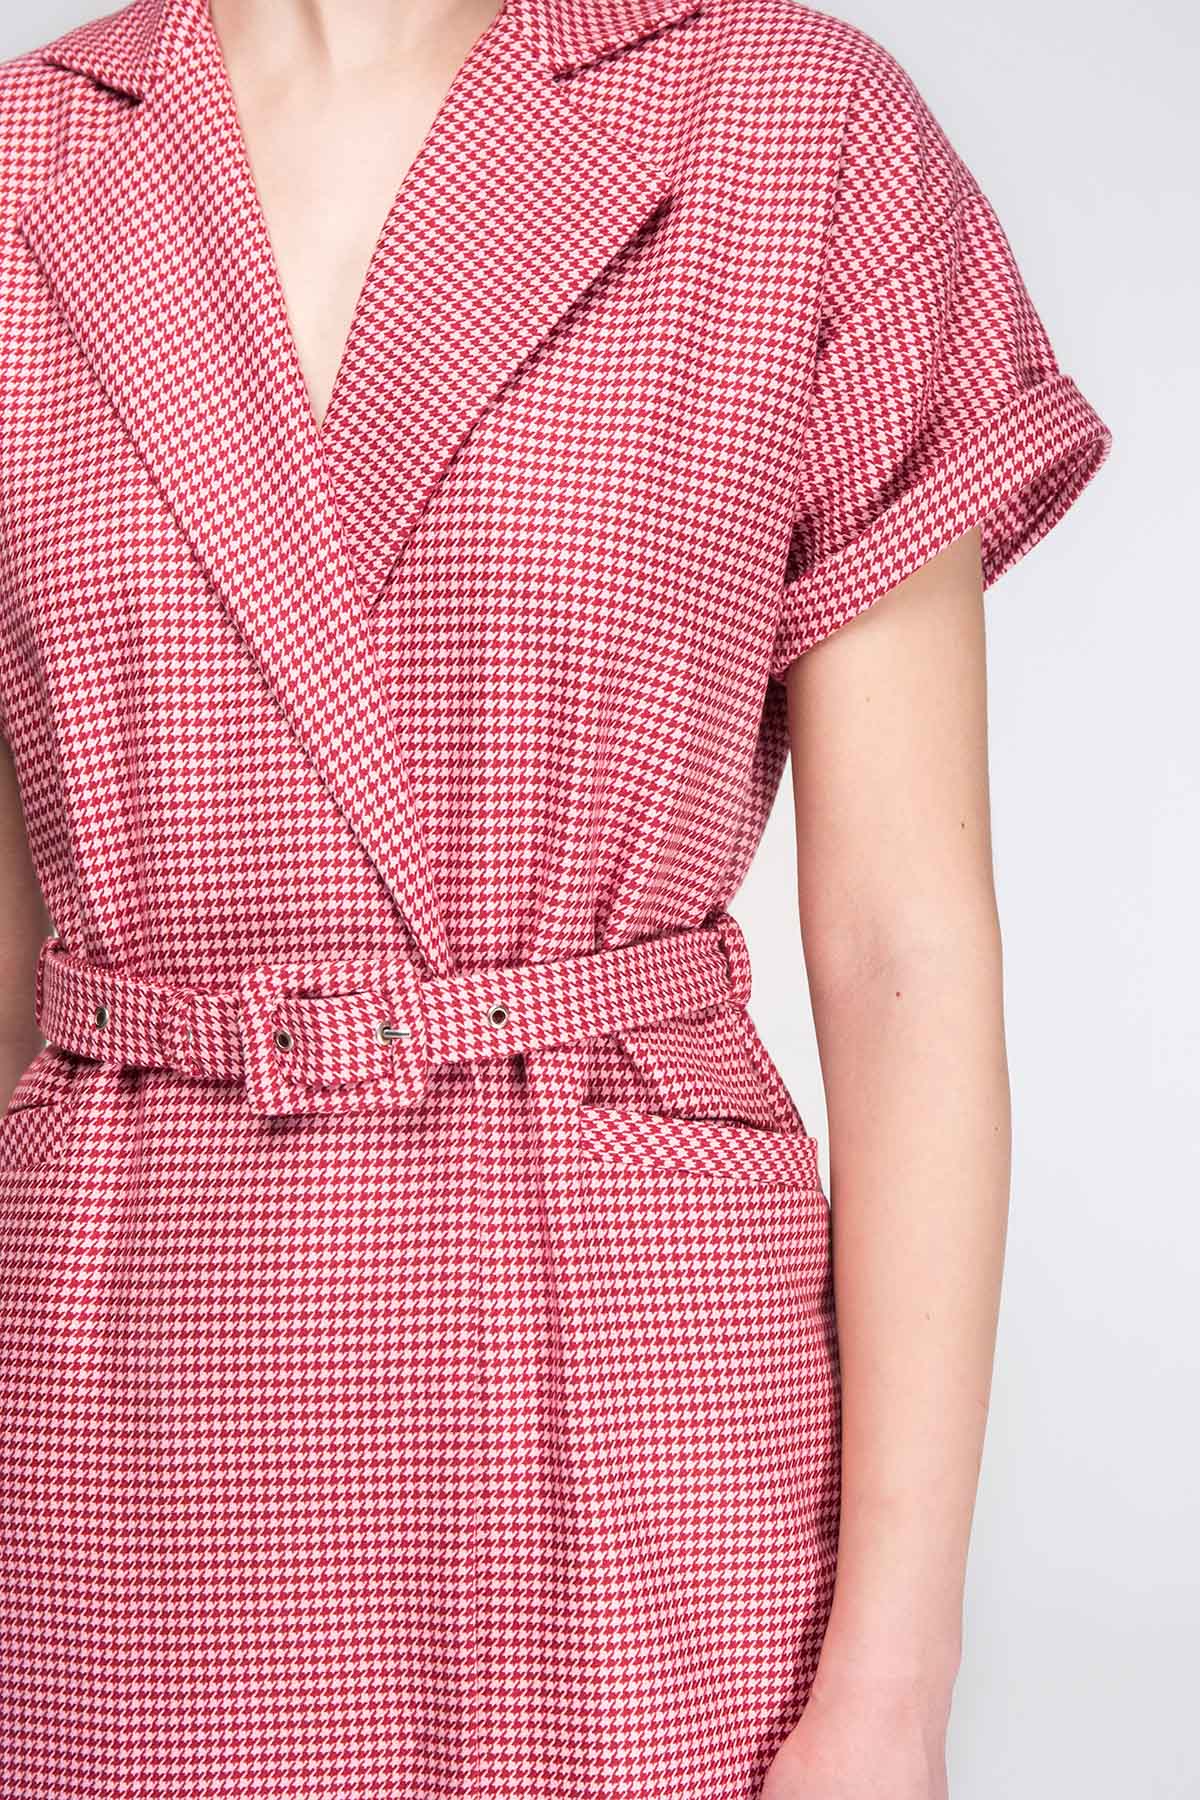 Pink-red houndstooth wrap dress with a waist, photo 17